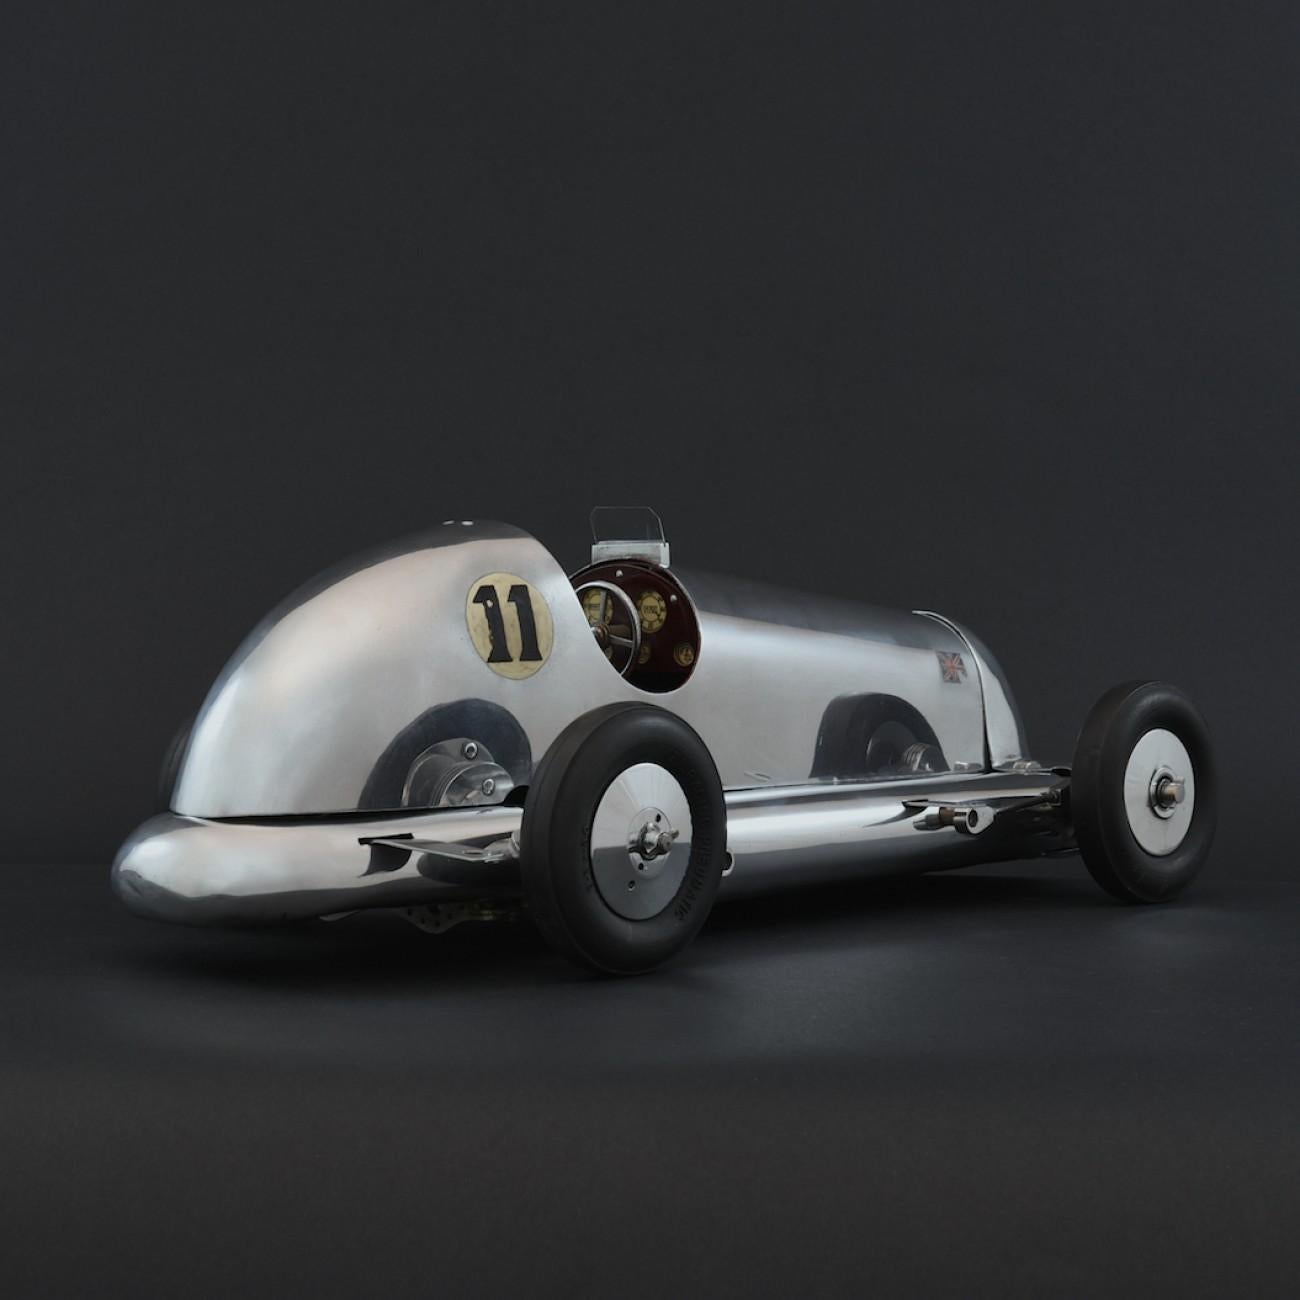 The car comprises of a ‘Buck 2A’ chassis kit by Electra with hand made polished metal bodywork. A 6cc Stentor engine drives through a clutch providing power to a rear axle. Wheels and tyres are original ZN, which with the other components would date